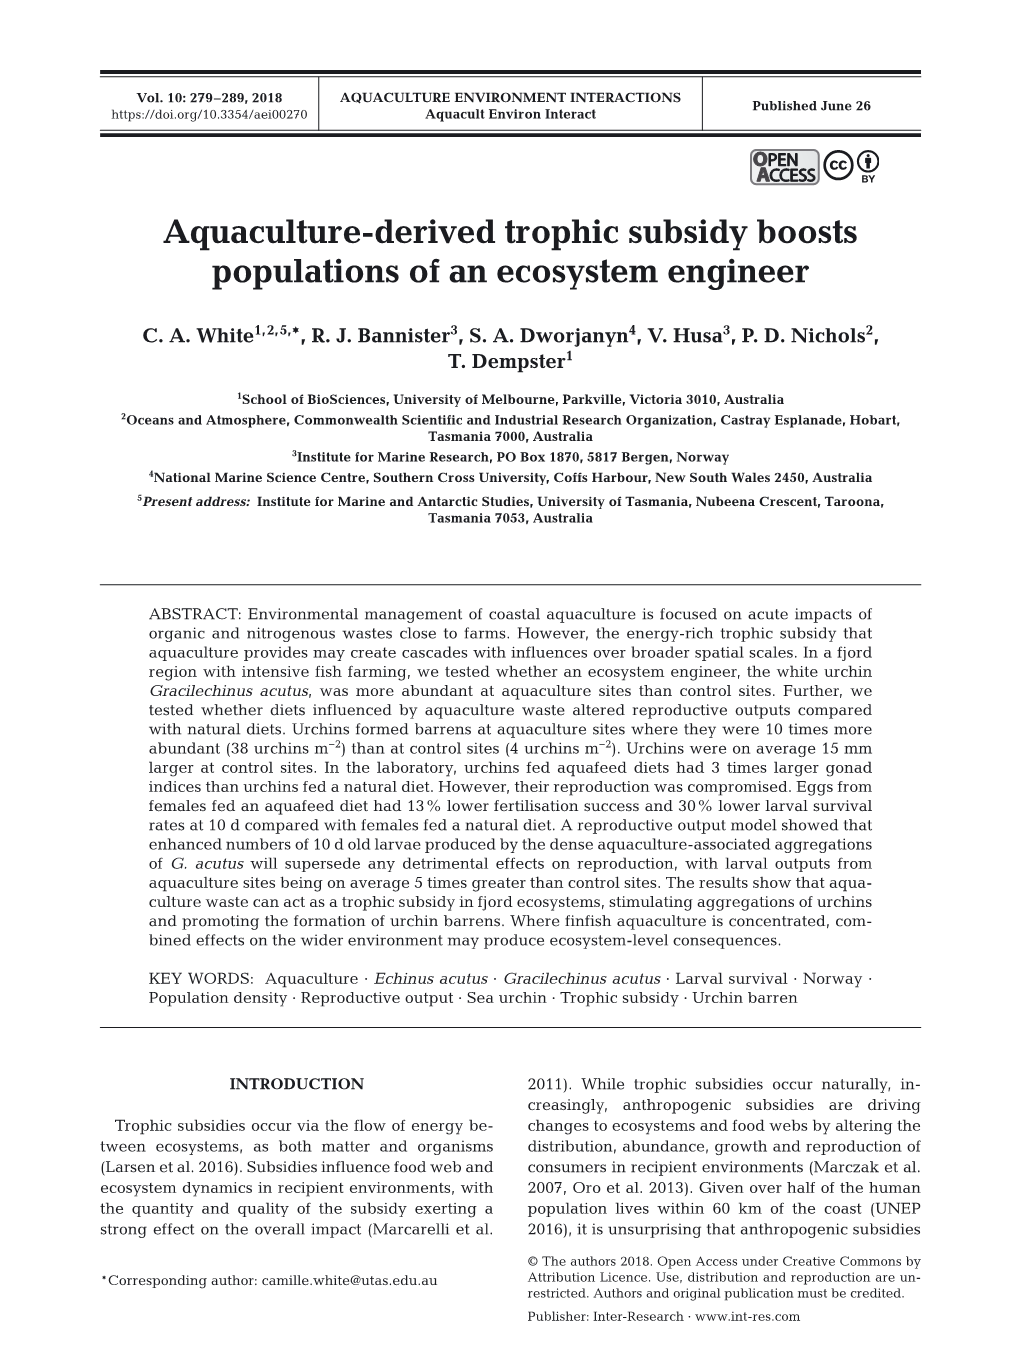 Aquaculture-Derived Trophic Subsidy Boosts Populations of an Ecosystem Engineer